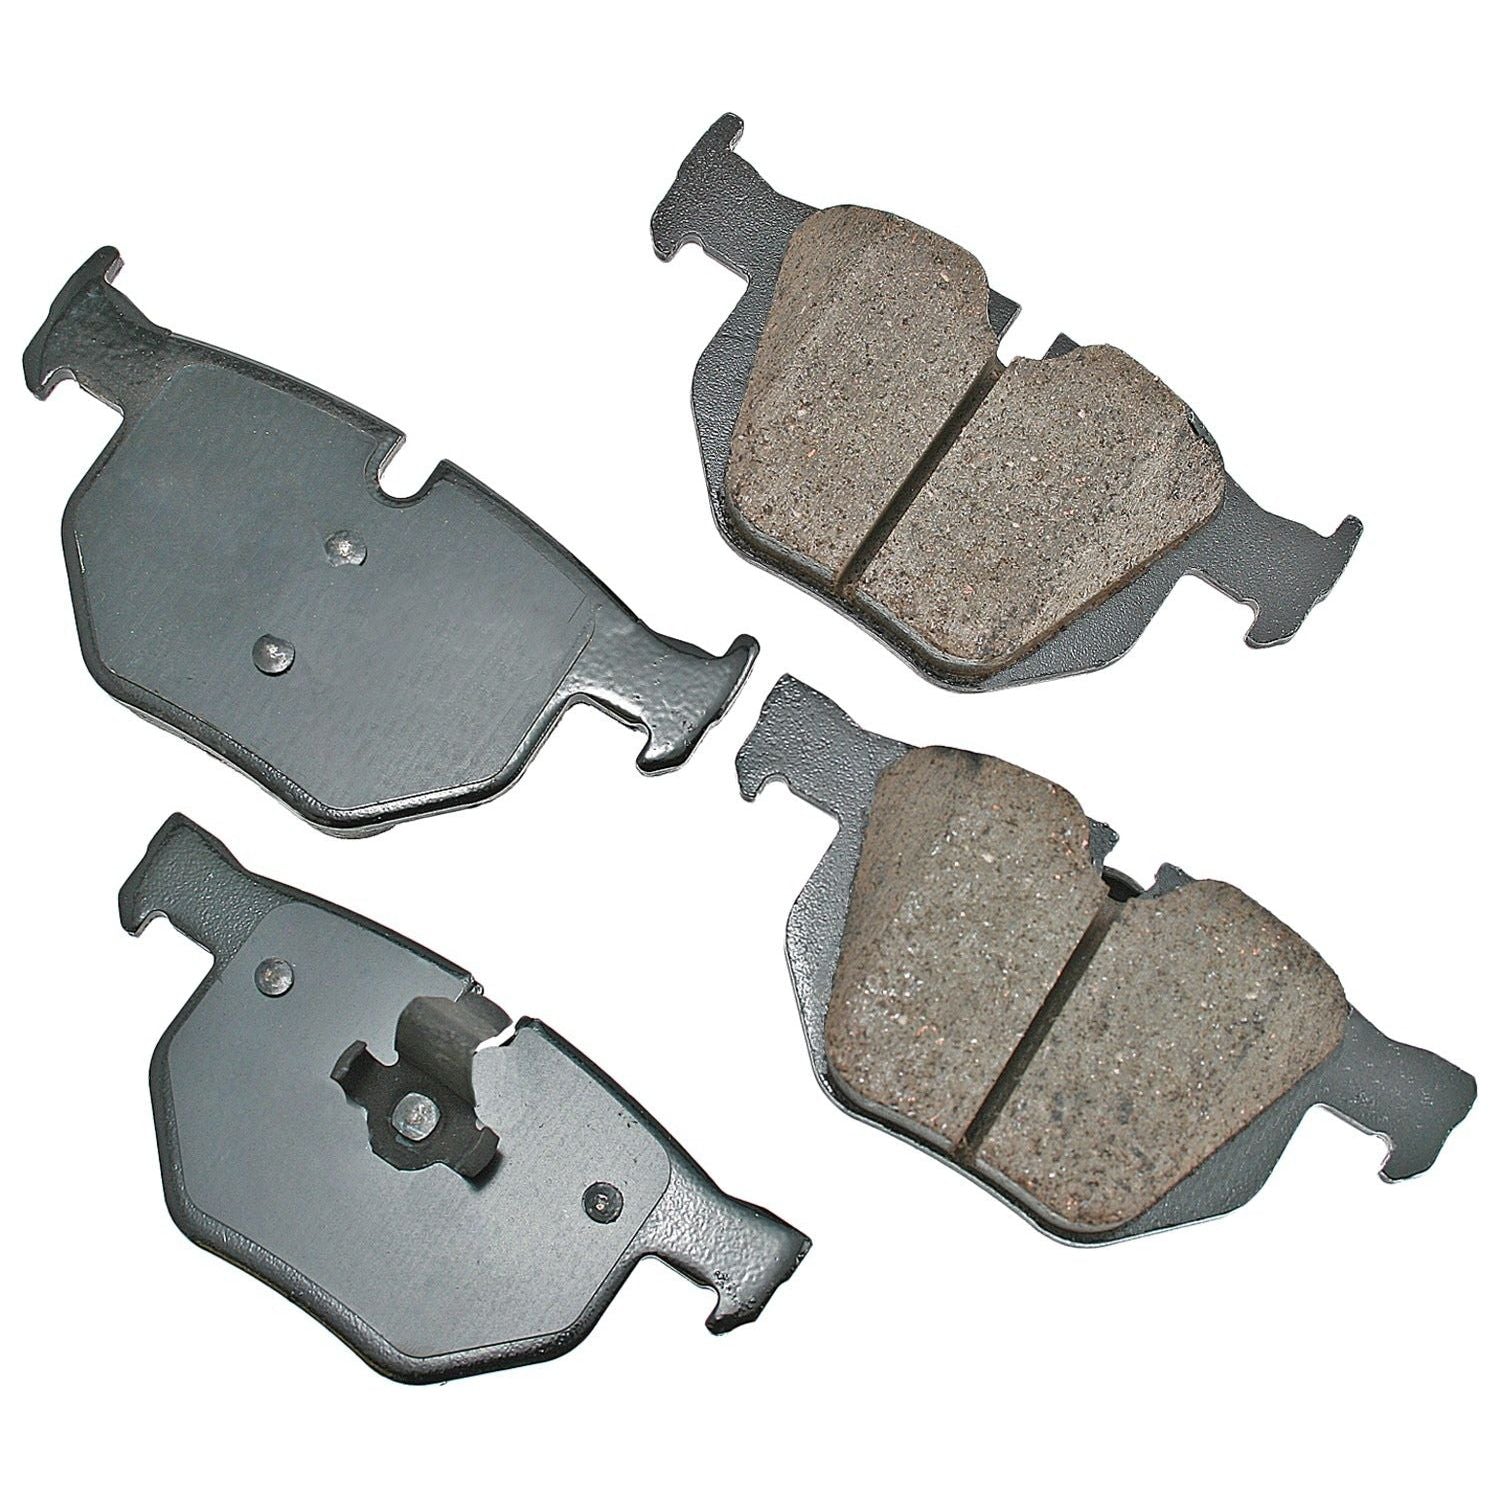 AKEBONO EUR 1042.00 - Brake Pads Rear BMW 525i 04-07 525xi 06-07 - Auto Parts Finder - Parts Ghoul